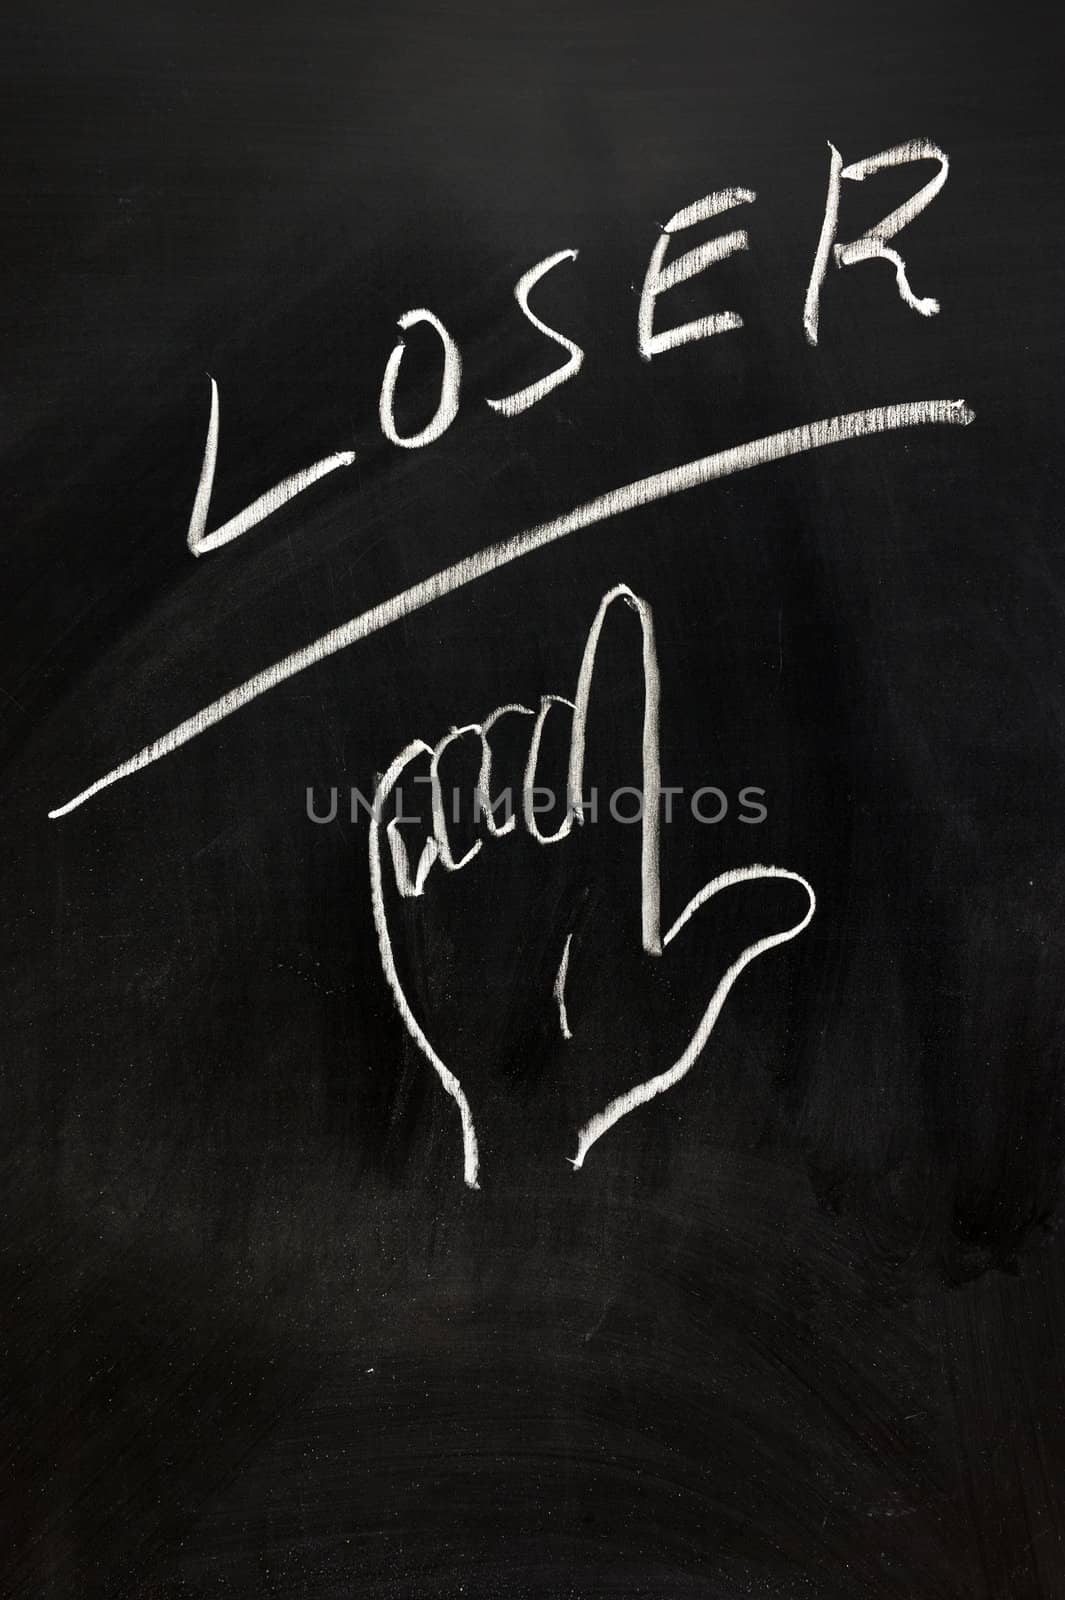 Chalk drawing - Finger point to text pf "Loser"